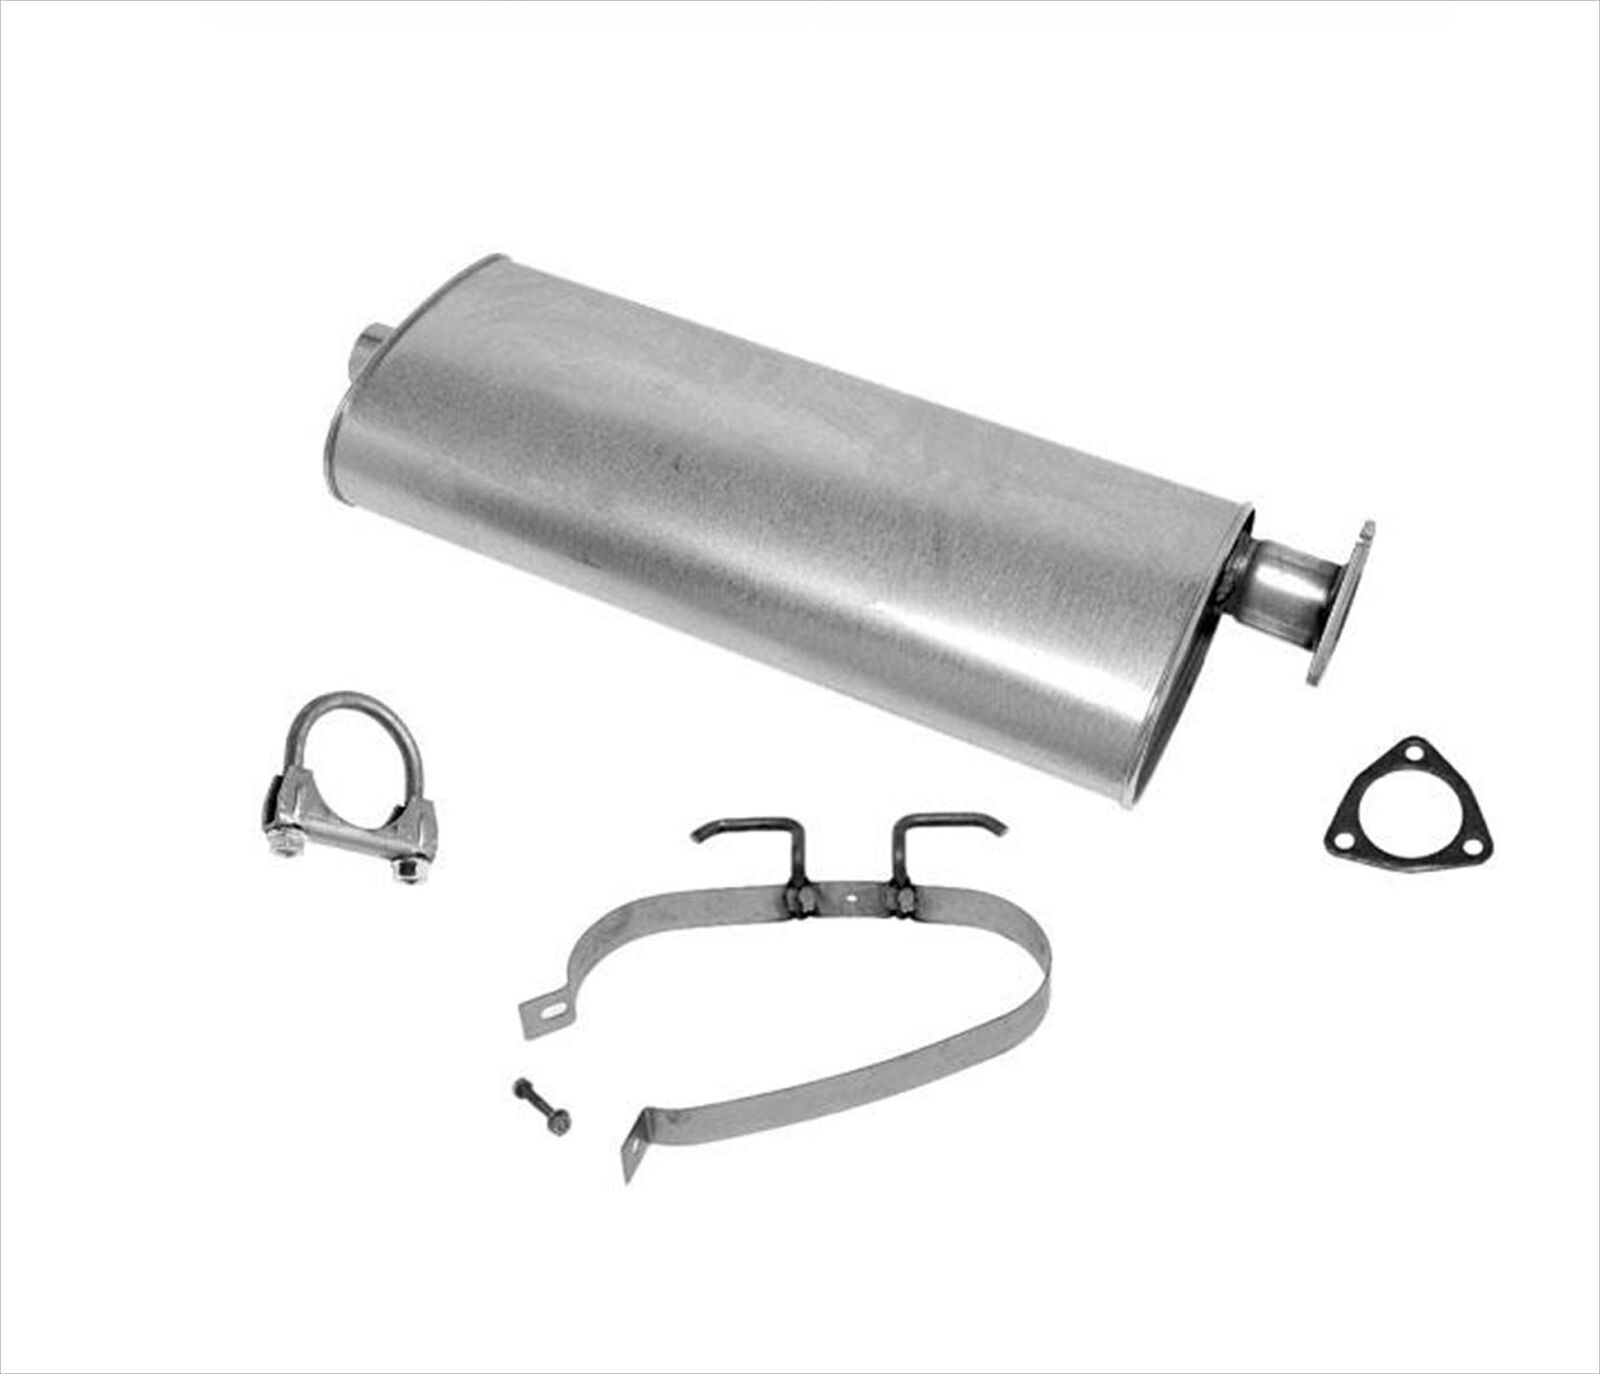 Middle Muffler for Chevrolet S10 Blazer & GMC Jimmy with 4 Doors 1995-1999